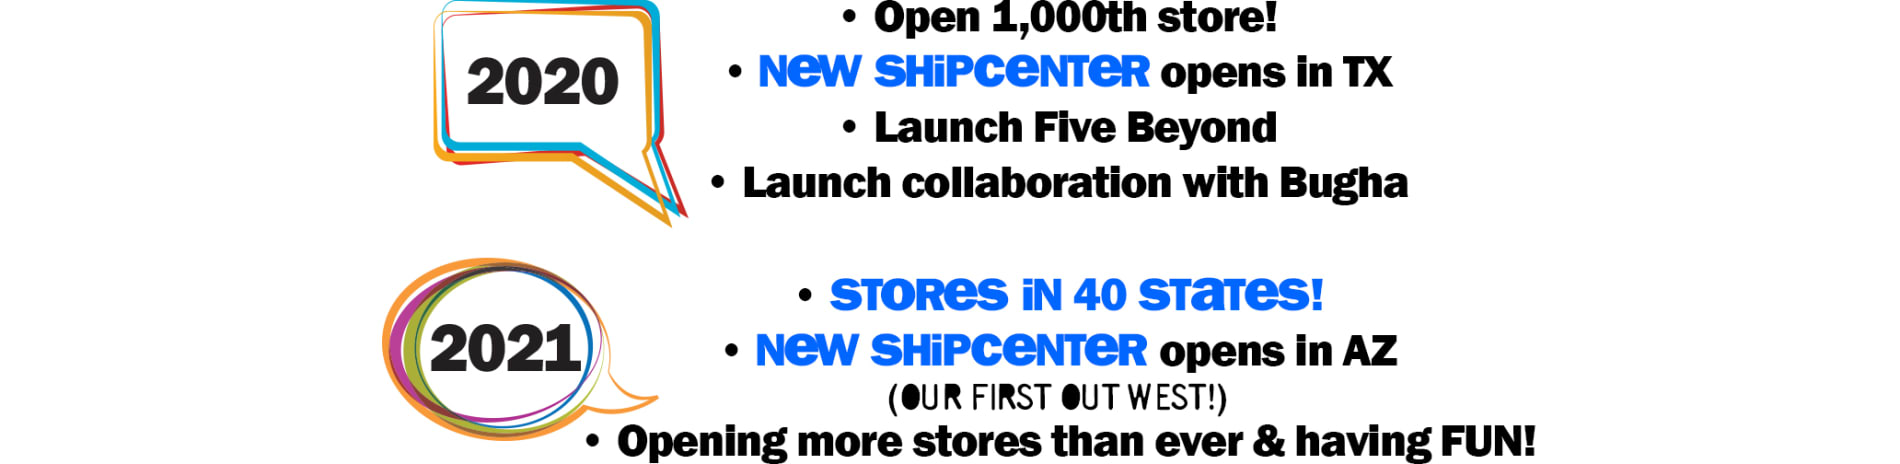 2020: Opens 1,000th store! | New Shipcenter opens in TX | Launch Five Beyond | Launch collaboration with Bugha 2021: Store in 40 states! | New Shipcenter opens in AZ ( OUR FIRST OUT WEST!) | opening more stores than ever & having fun!